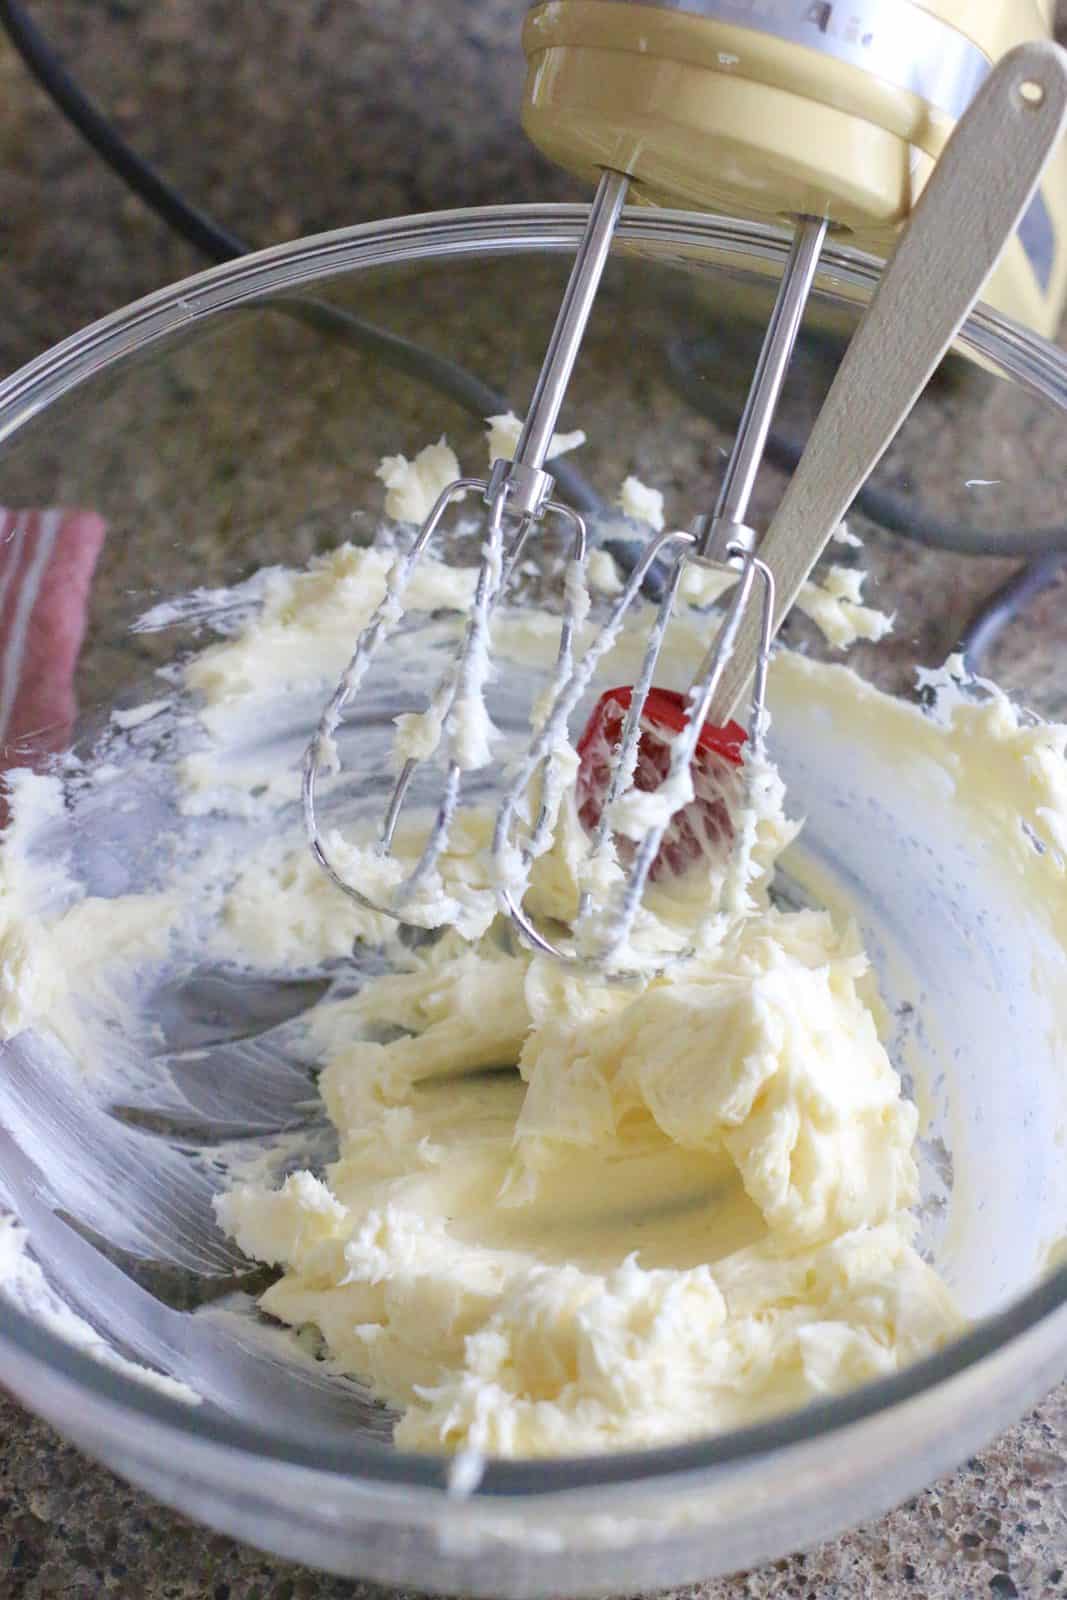 butter mixed in a clear glass mixing bowl, hand mixer shown in bowl.